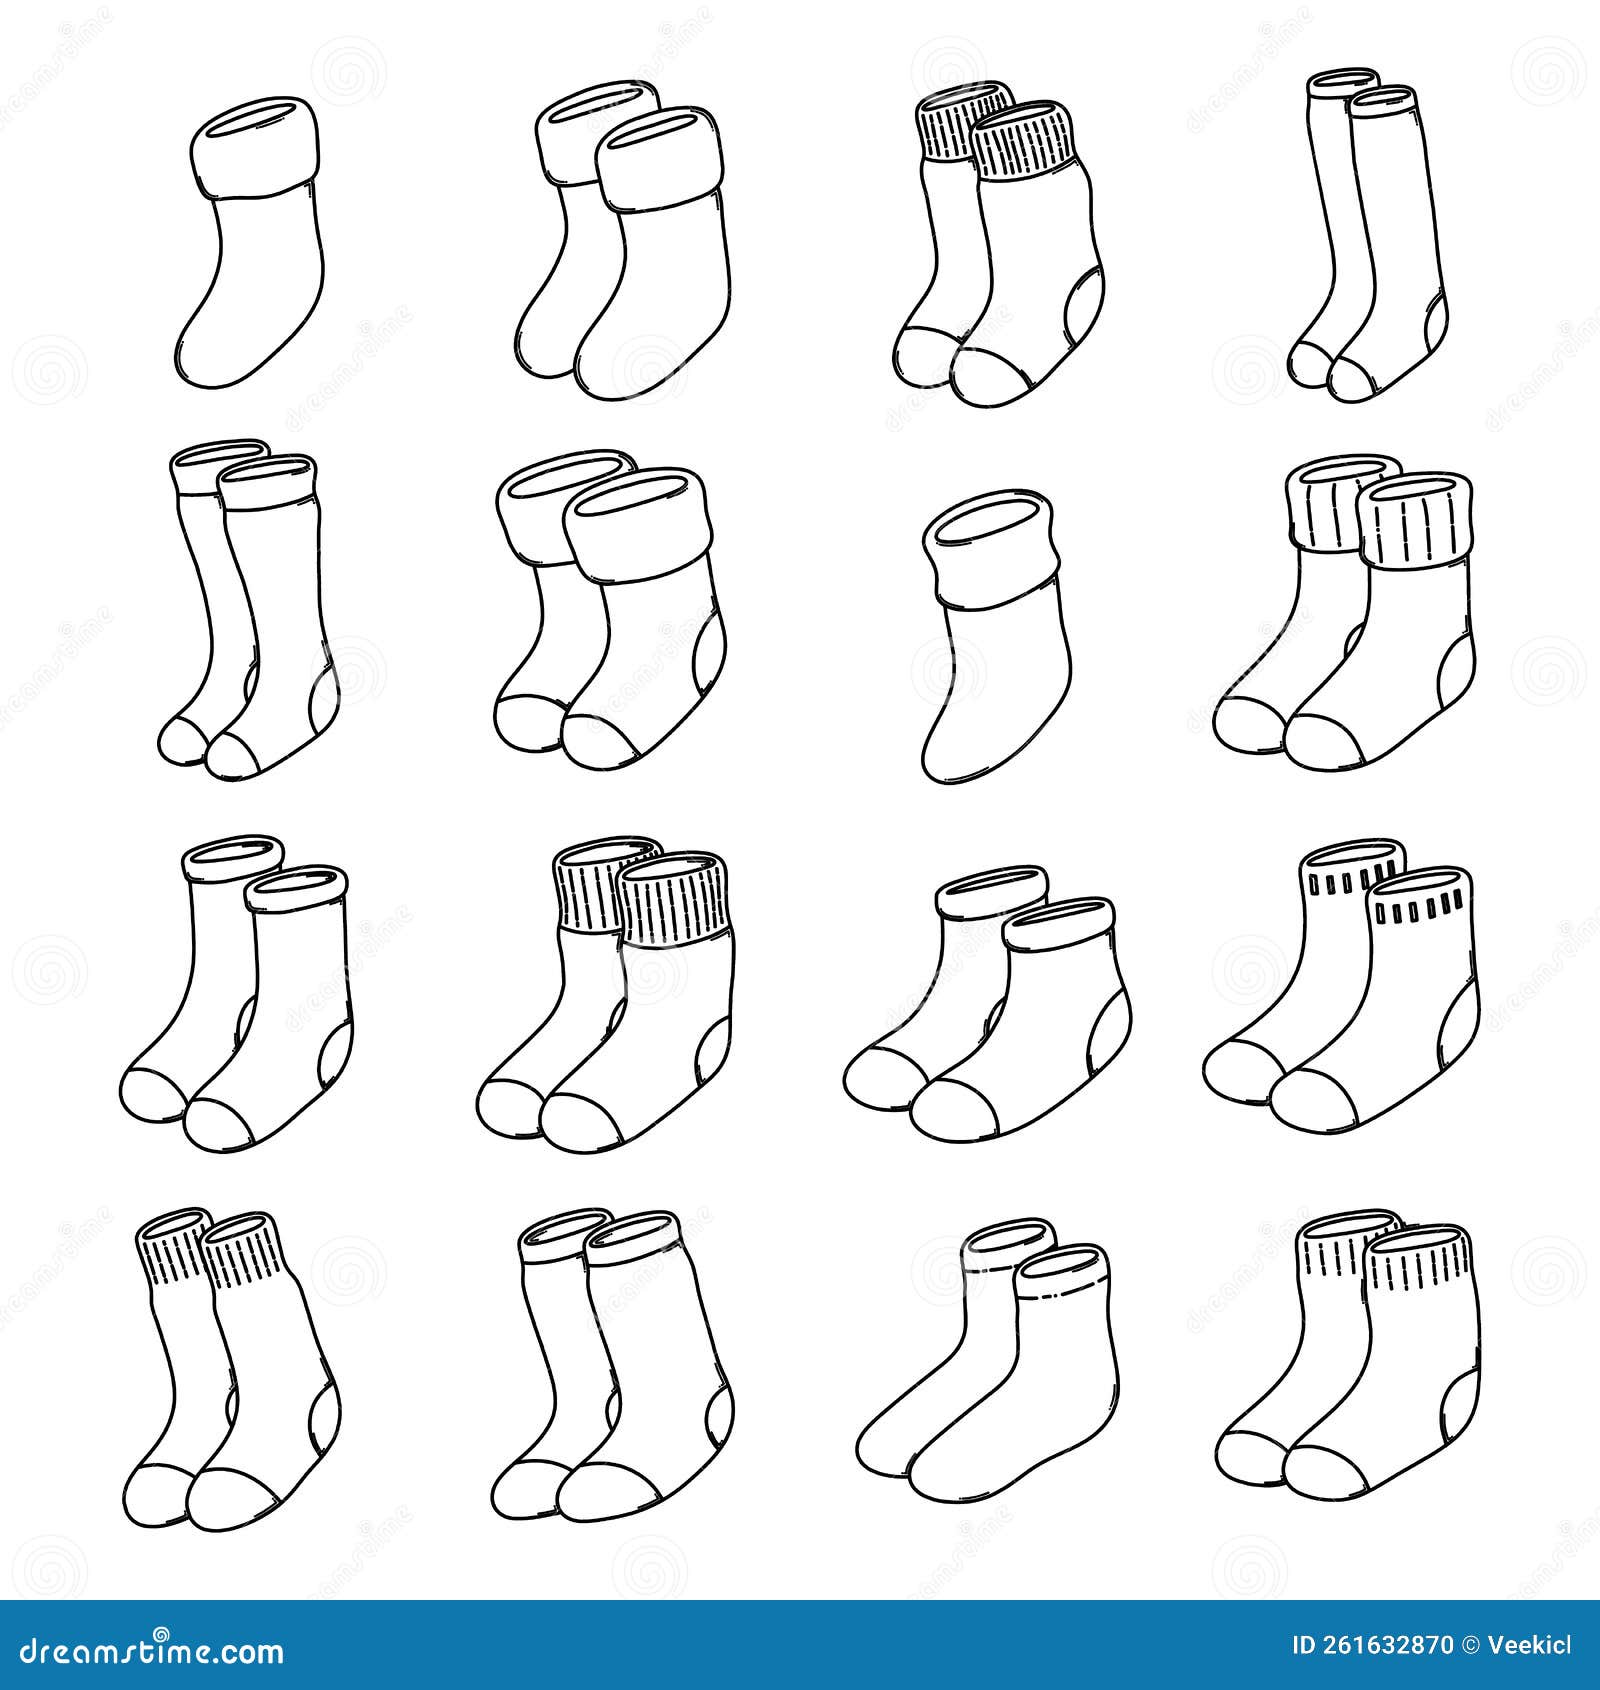 Sock Doodle Vector Icon Set. Drawing Sketch Illustration Hand Drawn ...